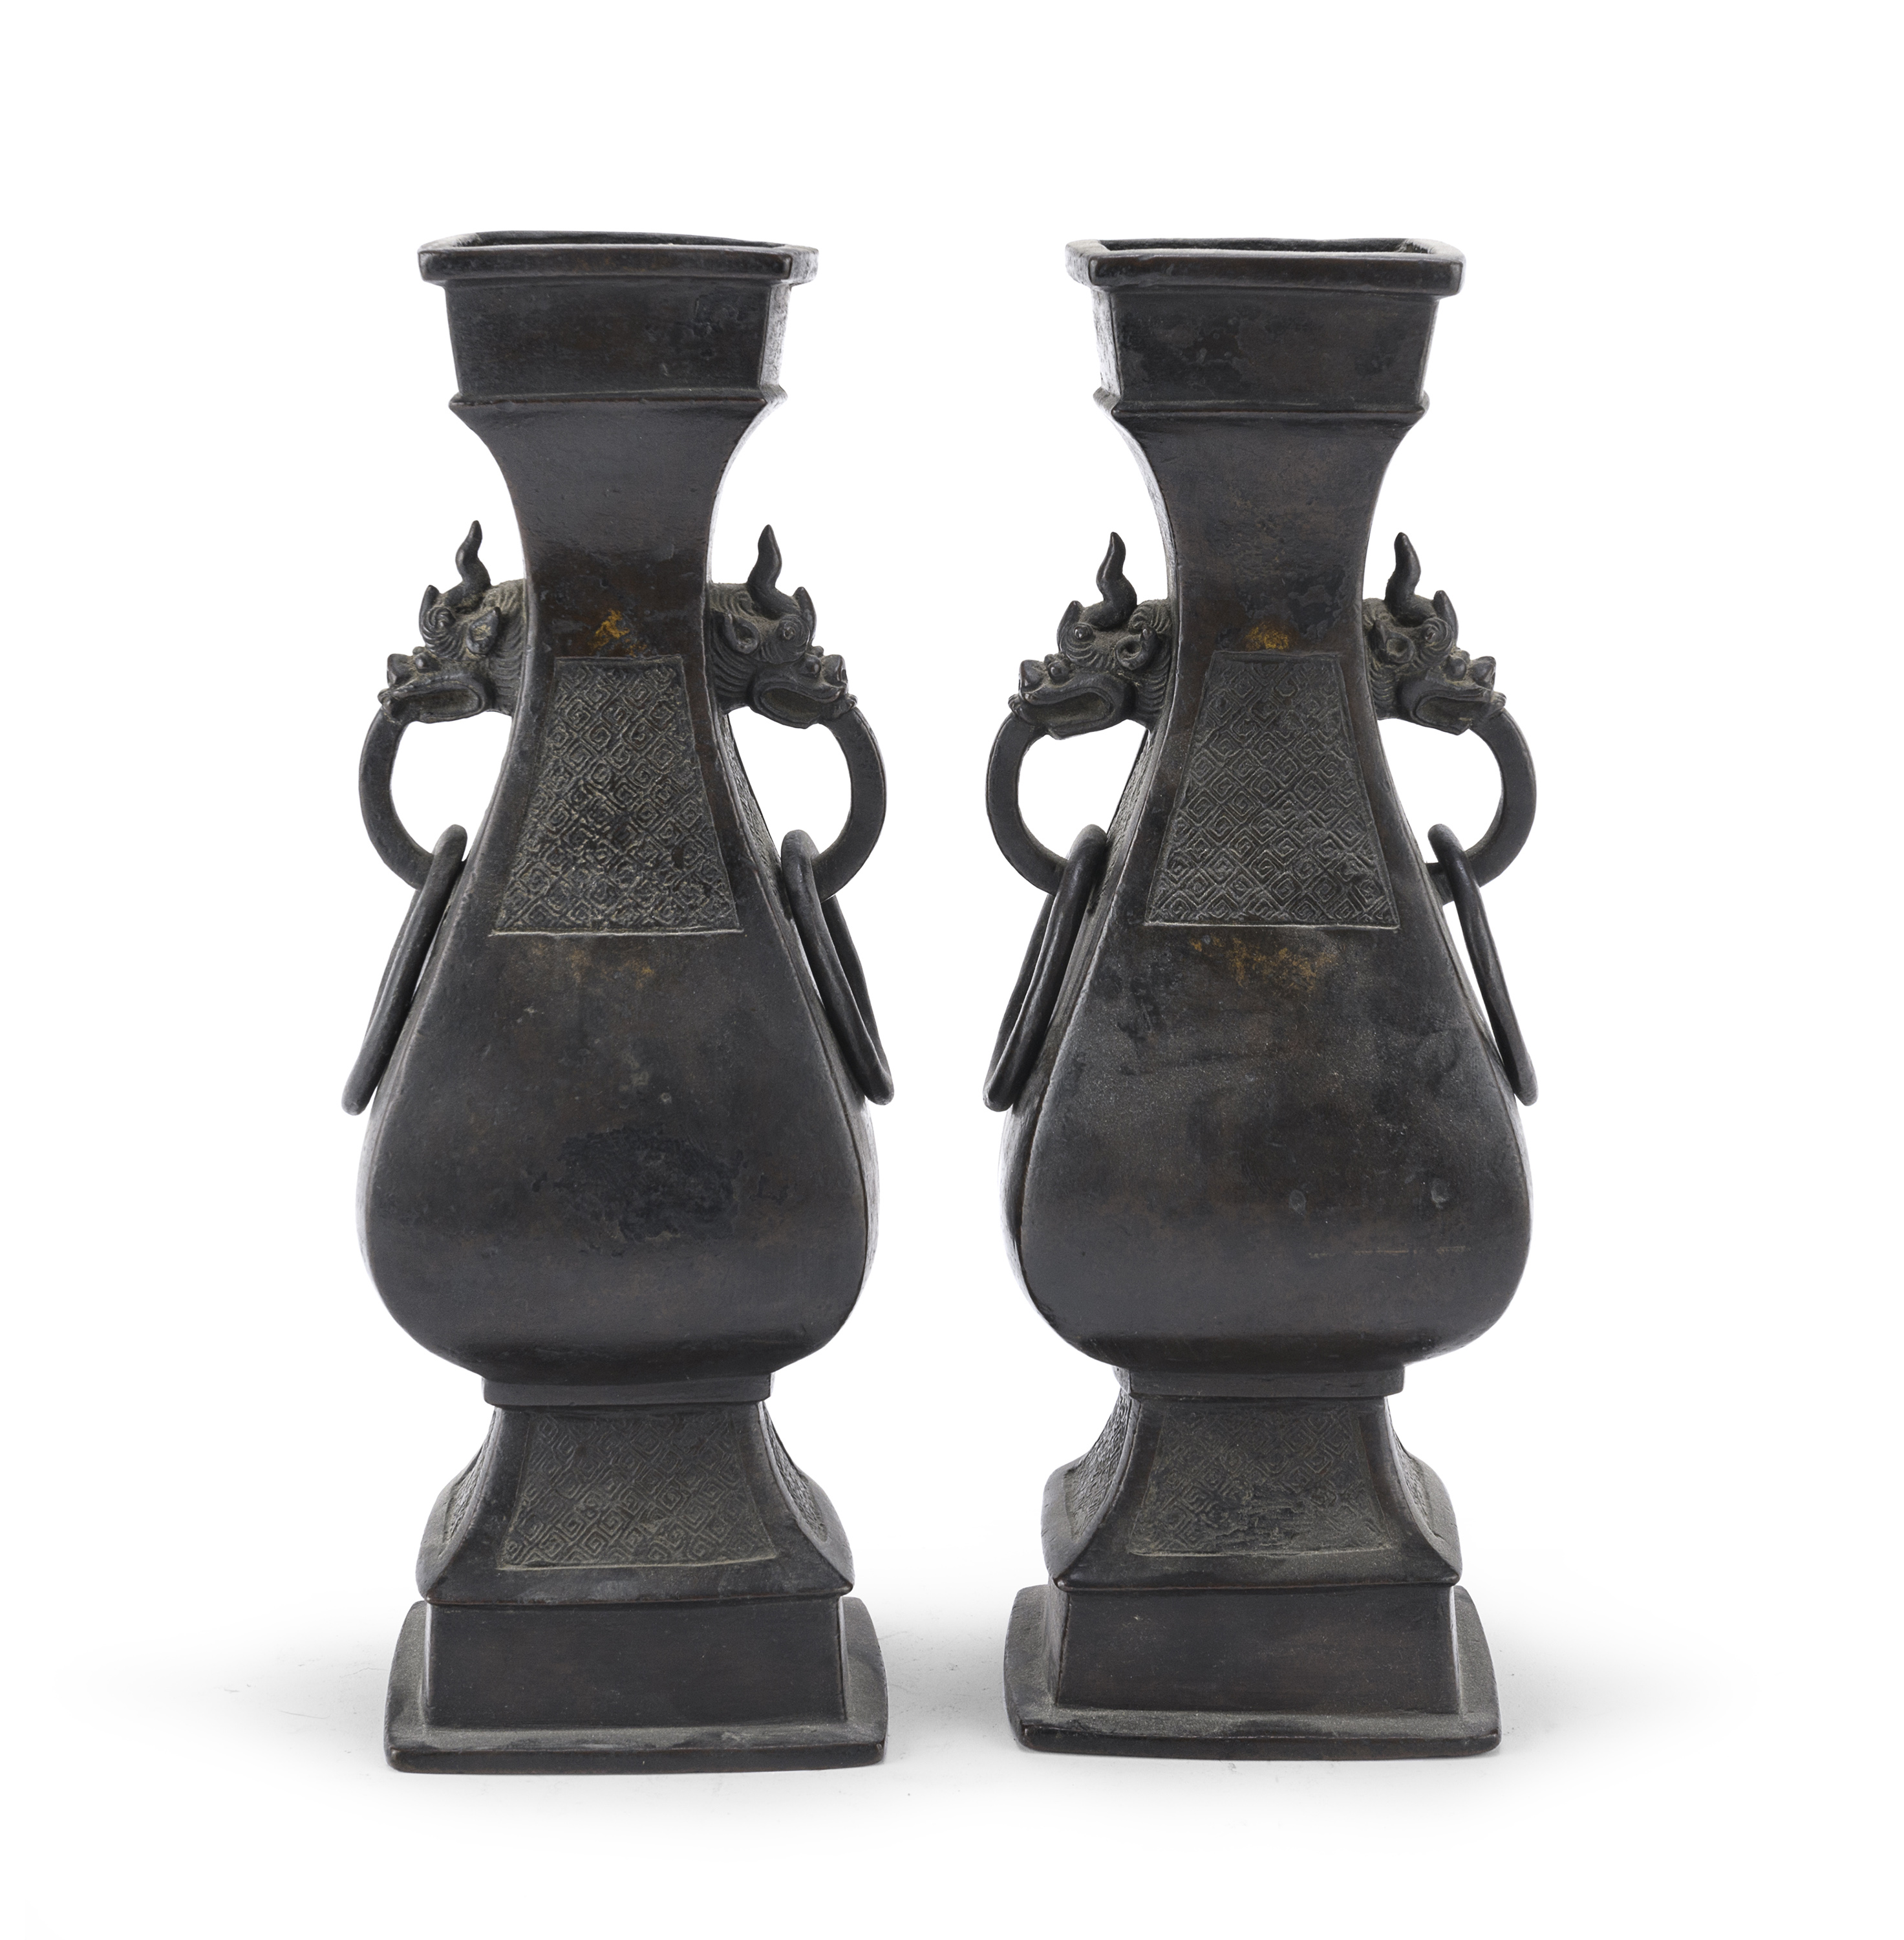 PAIR OF BRONZE VASES WITH BURNISHED PATINA JAPAN SECOND HALF 19TH CENTURY